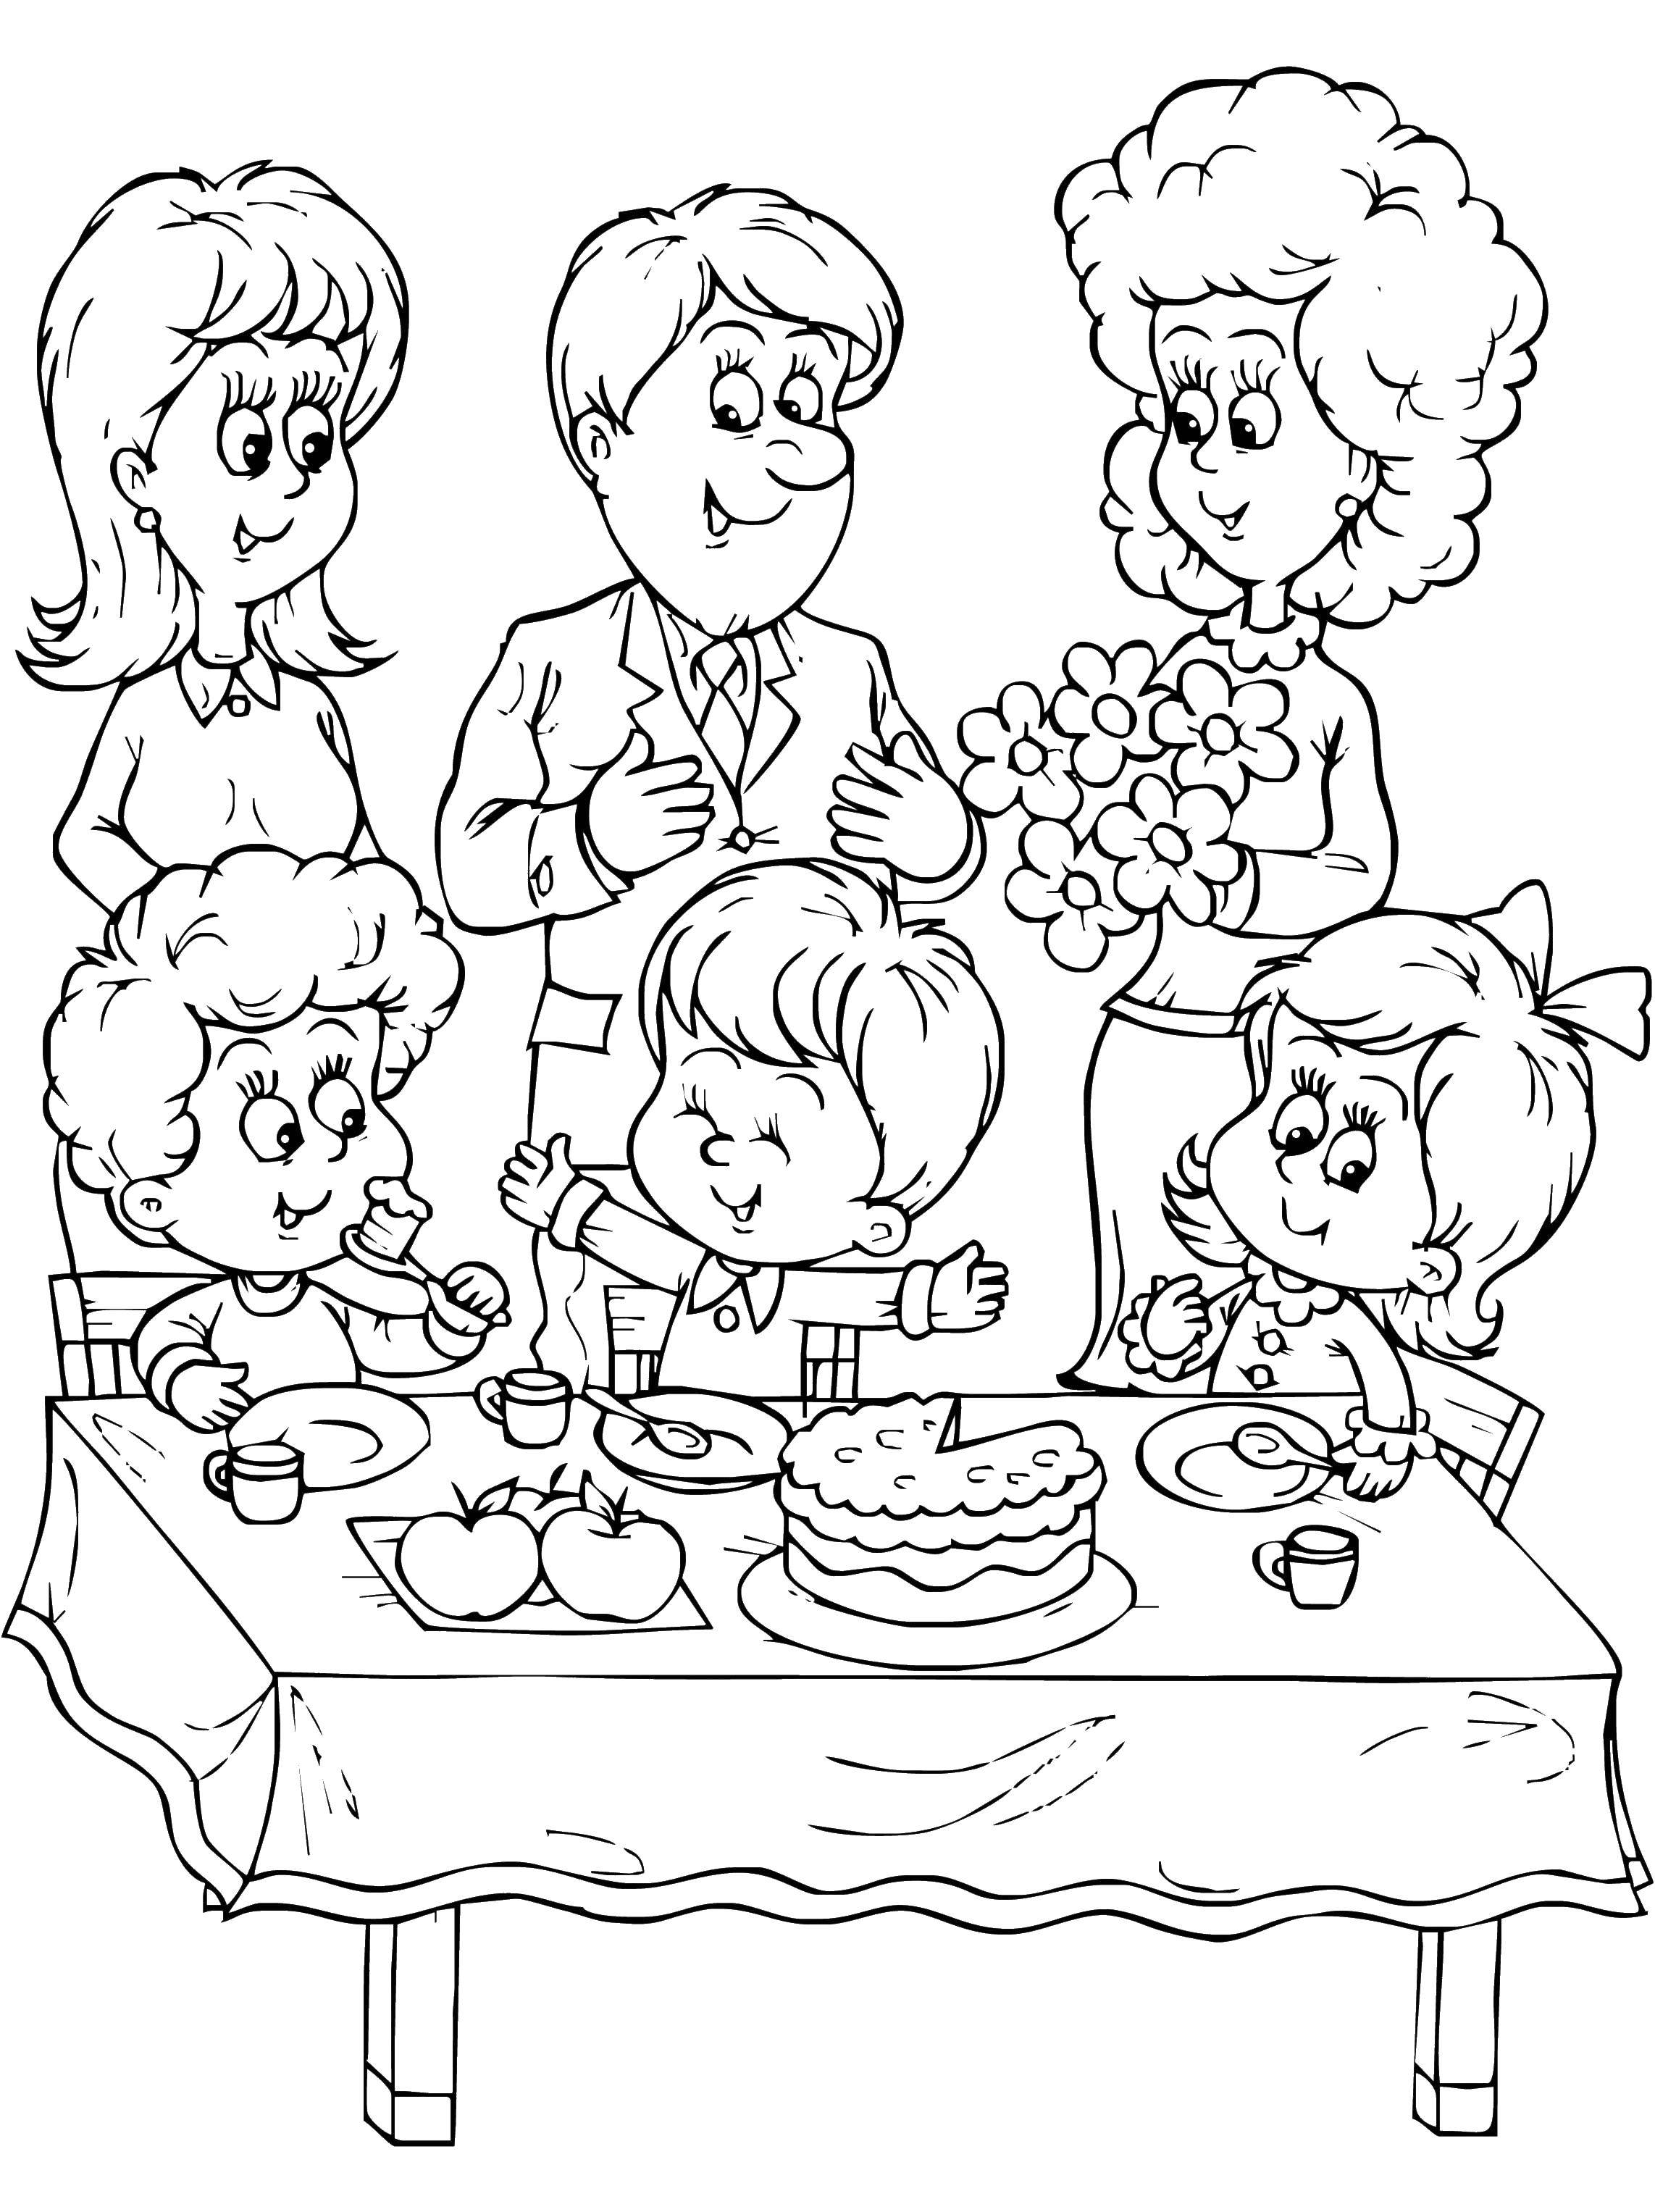 Coloring Family. Category Family members. Tags:  family, family members.